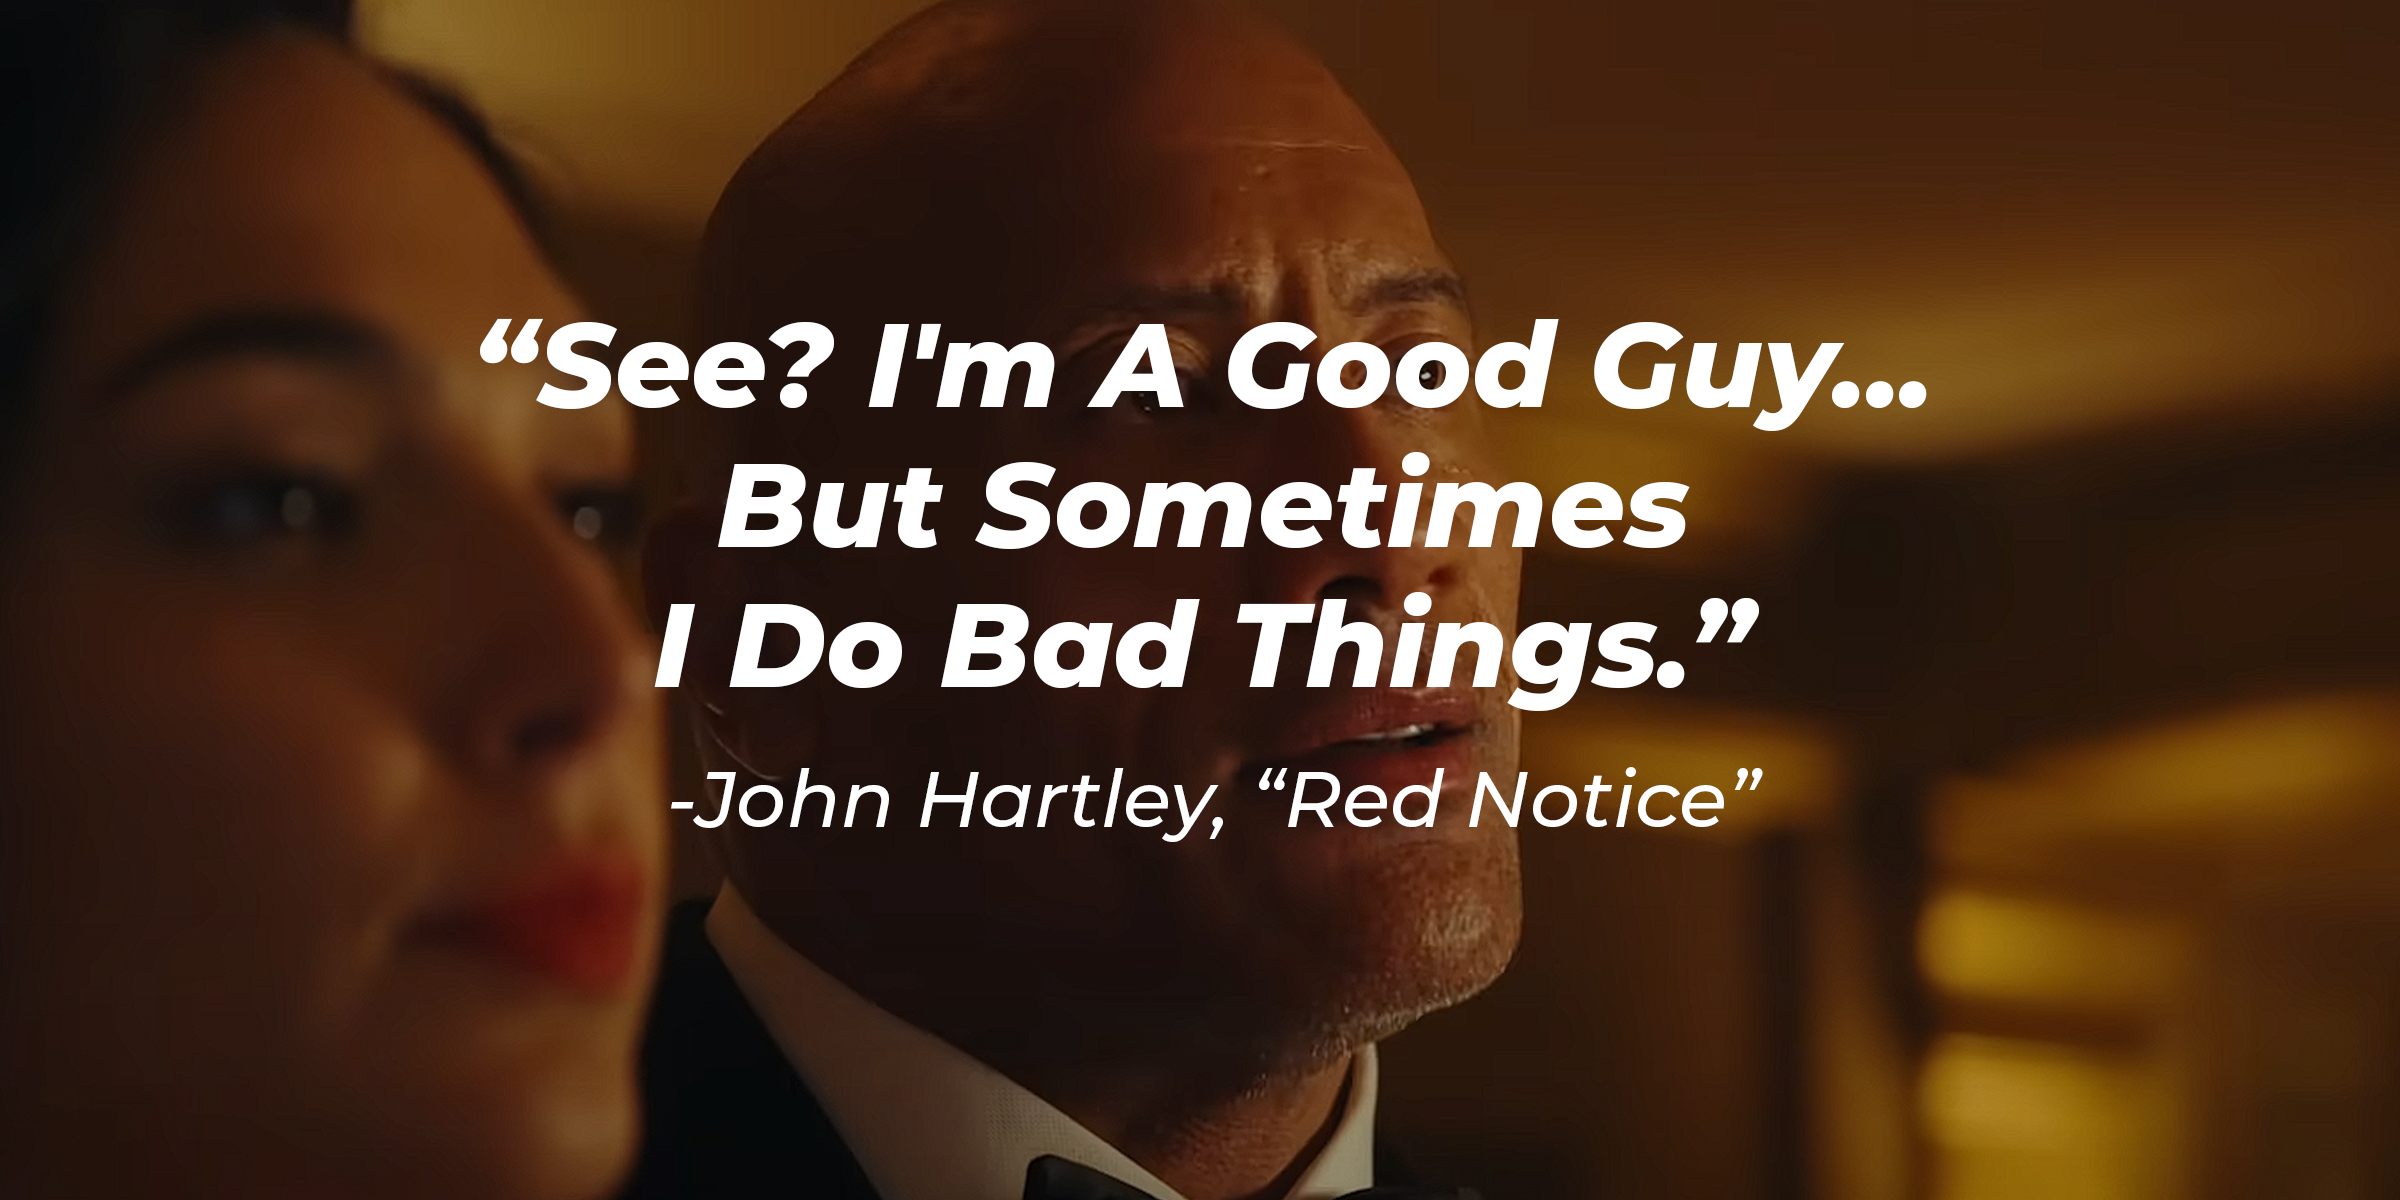 John Hartley's quote from "Red Notice:" "See? I'm A Good Guy... But Sometimes I Do Bad Things." | Source: Youtube.com/Netflix